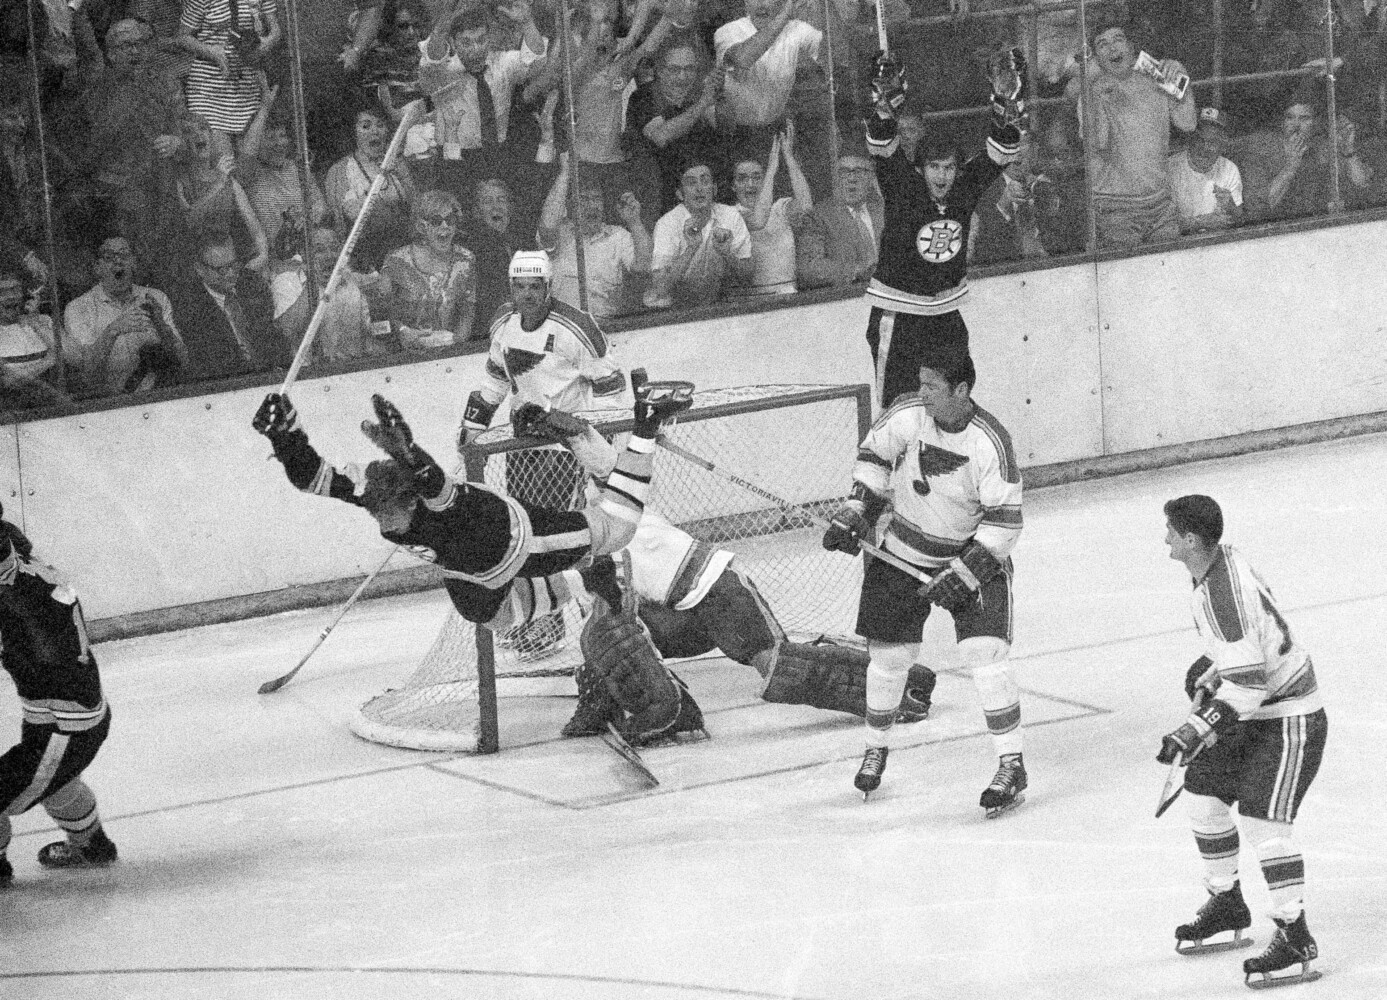 Bobby Orr Through The Years - Sports Illustrated